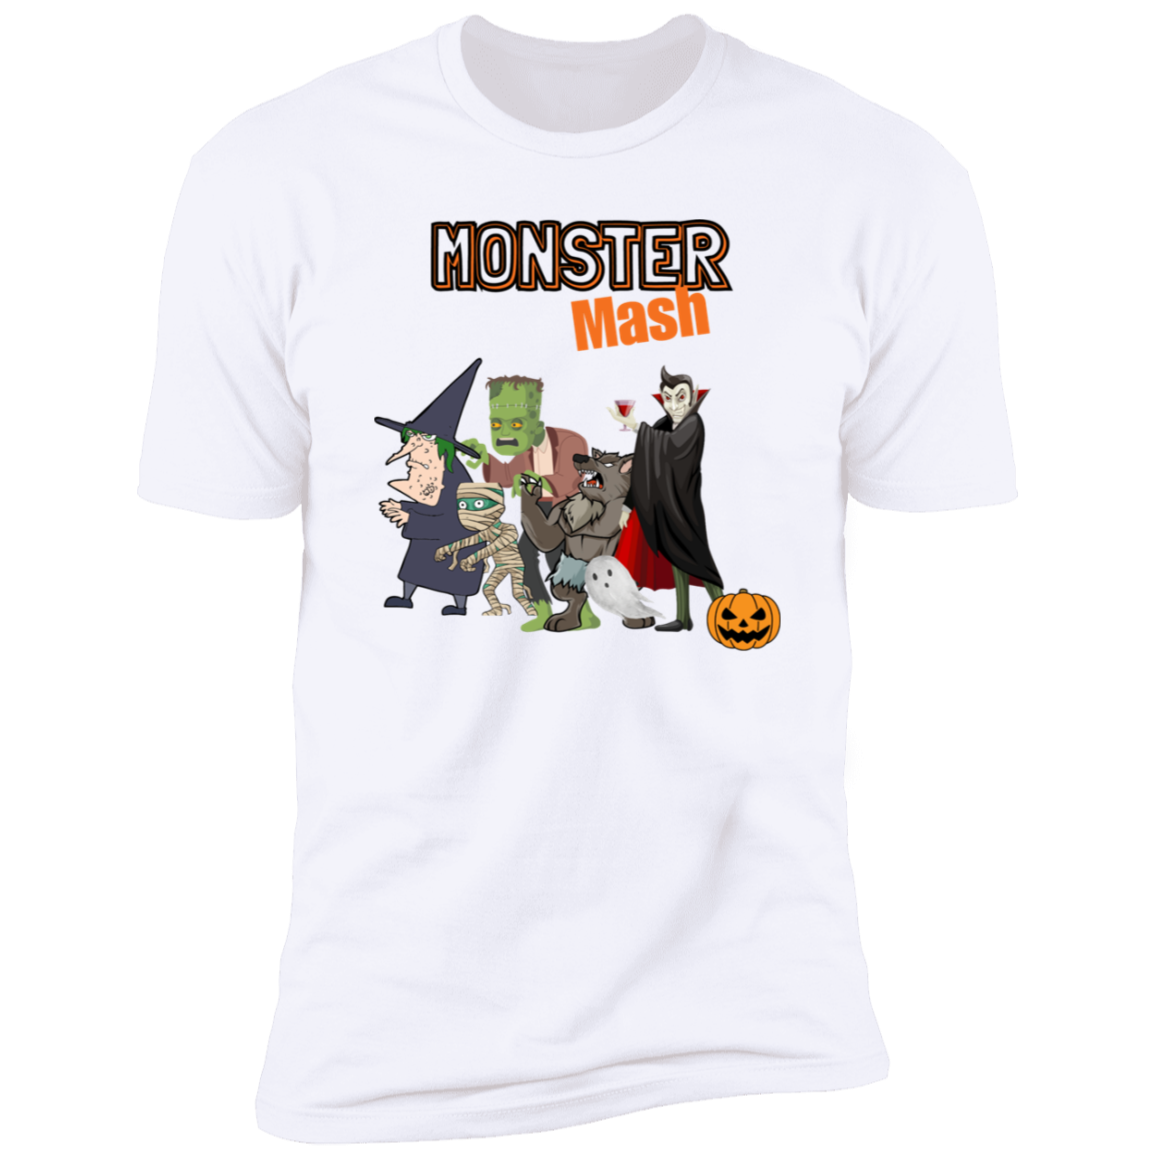 Get trendy with MONSTER Mash t shirt - T-Shirts available at Good Gift Company. Grab yours for $17.95 today!